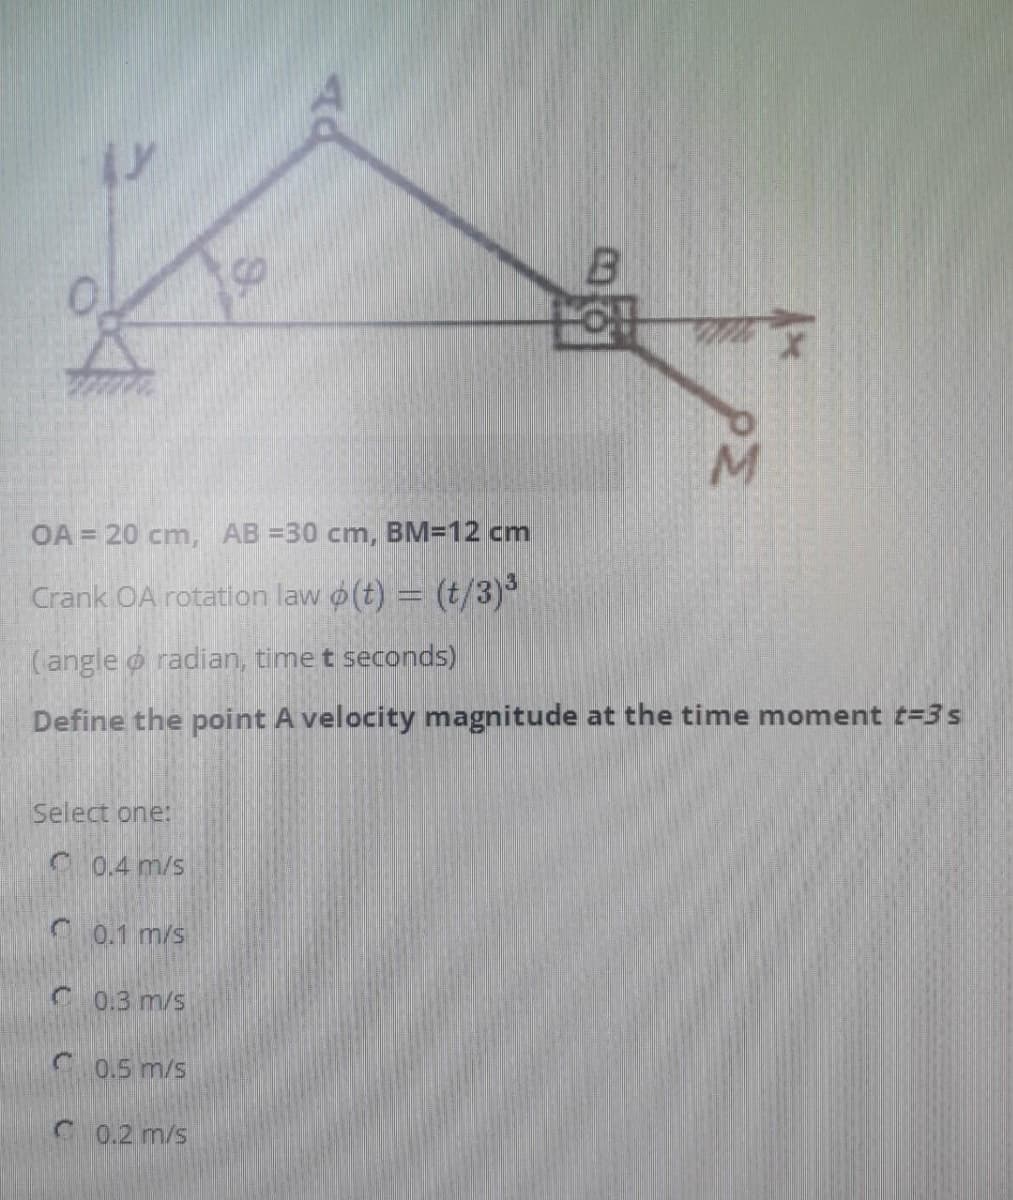 OA = 20 cm, AB =30 cm, BM=12 cm
Crank OA rotation law o(t) = (t/3)
(angle o radian, time t seconds)
Define the point A velocity magnitude at the time moment t=3 s
Select one:
C 0.4 m/s
0.1 m/s
C 0.3 m/s
0.5 m/s
C 0.2 m/s
